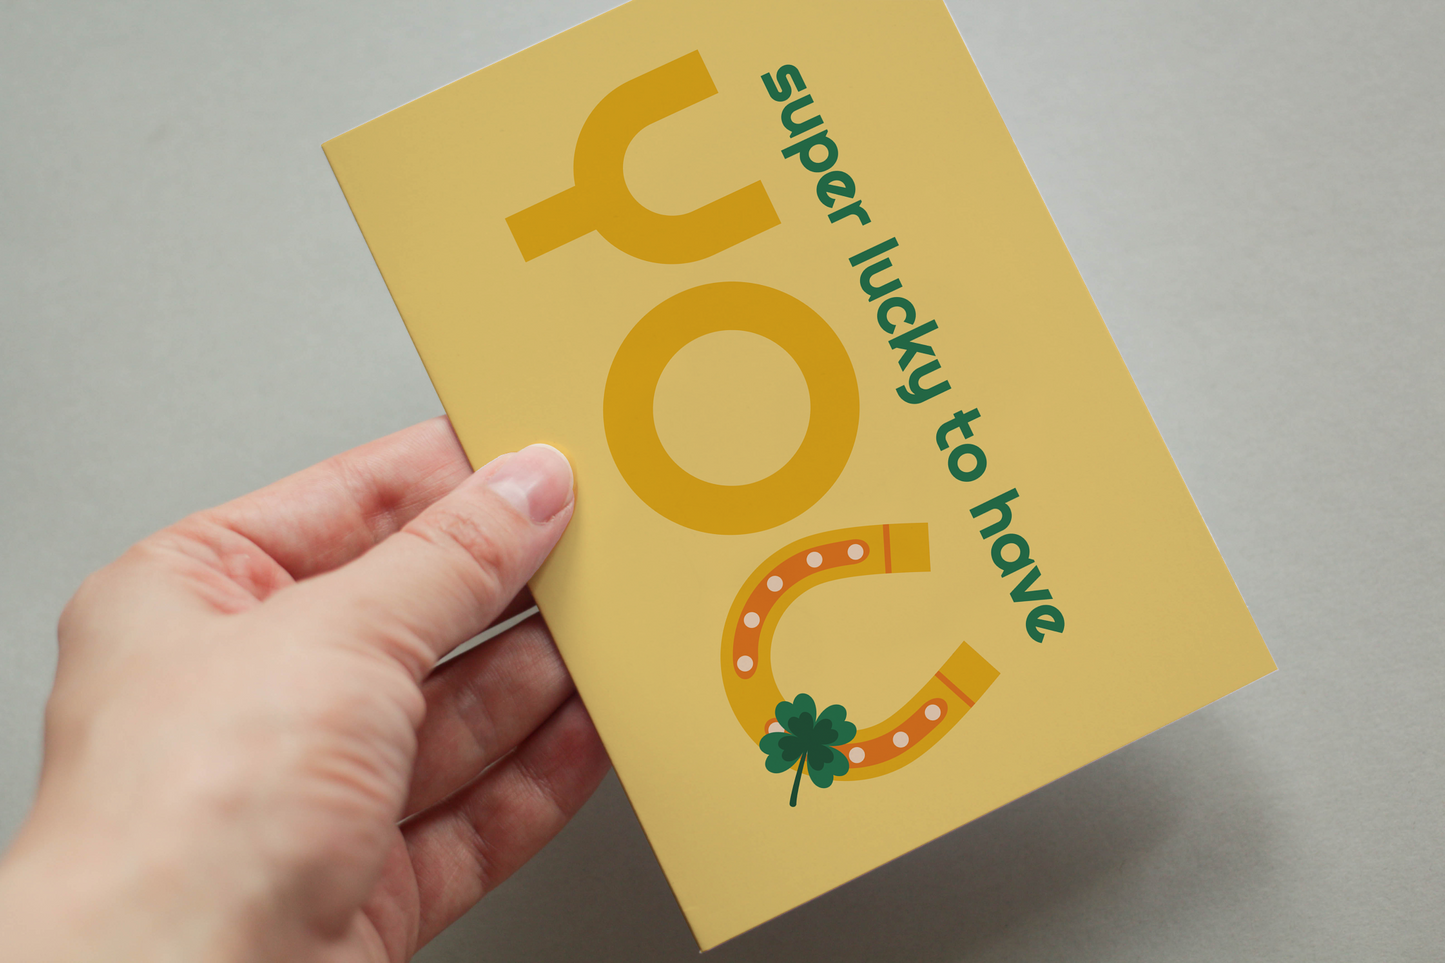 Just Got Lucky St Patrick's Day Postcard Bundle - Pack Of 5 Or 10.